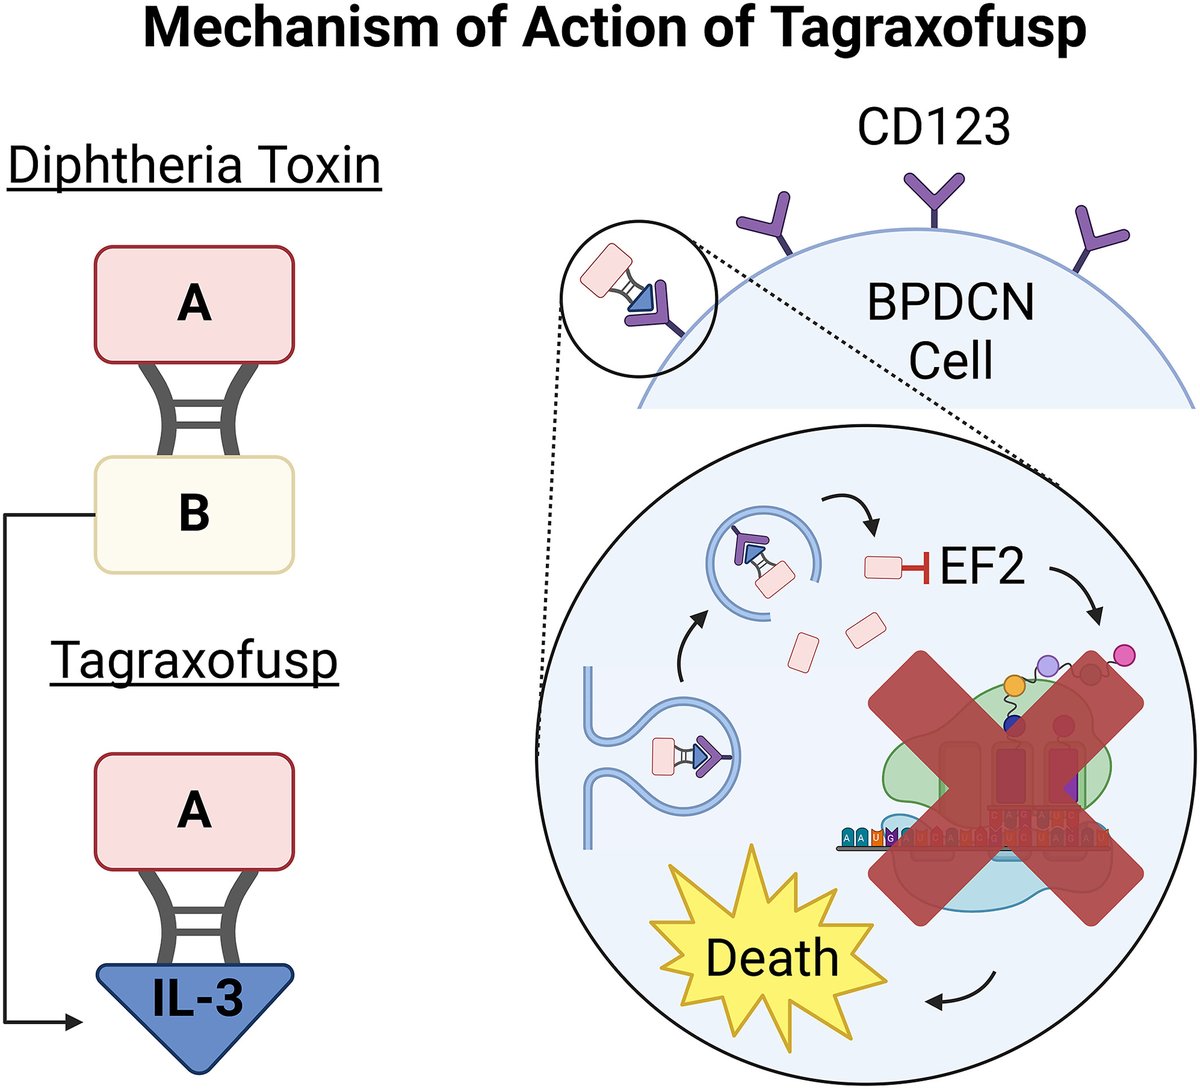 This new review article from @jenweiying, @mkonople, & @doctorpemm is all about #tagraxofusp for #BPDCN. Learn how it is being used in combination to improve outcomes in BPDCN & AML, & its developing role in other hematological malignancies: acsjournals.onlinelibrary.wiley.com/doi/10.1002/cn… @OncoAlert